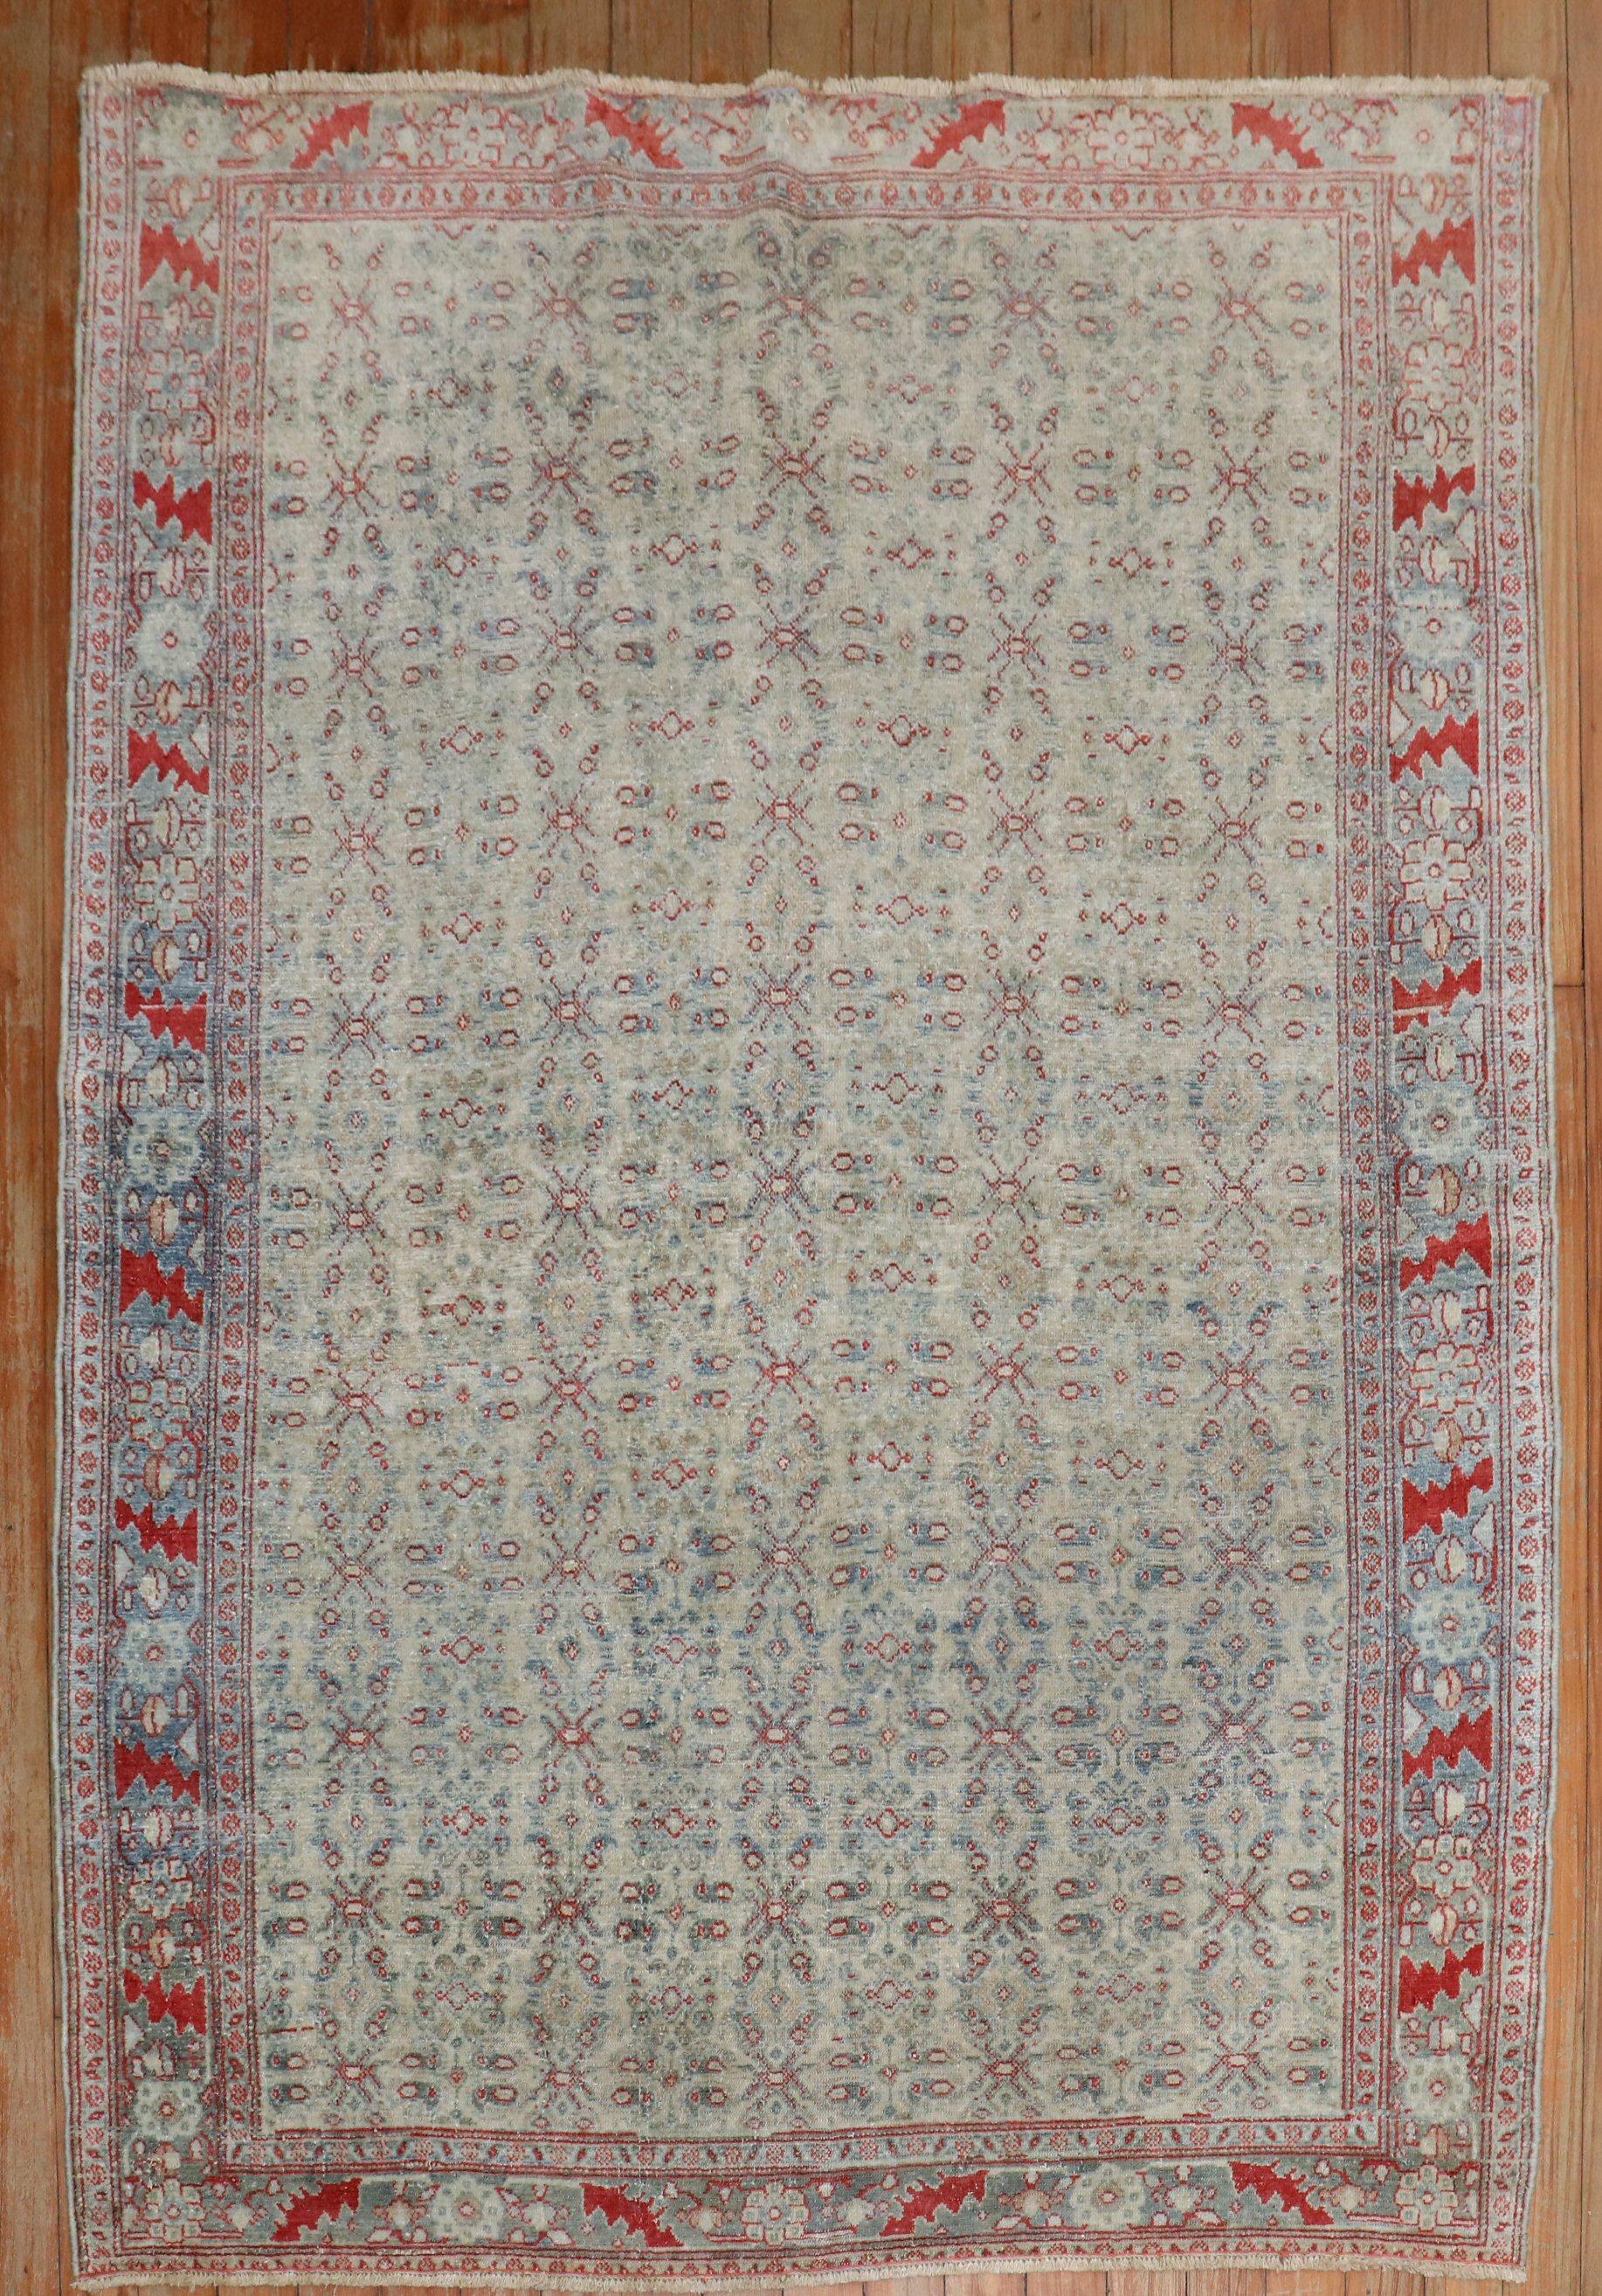 an early 20th century Persian scatter size rug

Measures: 3'6